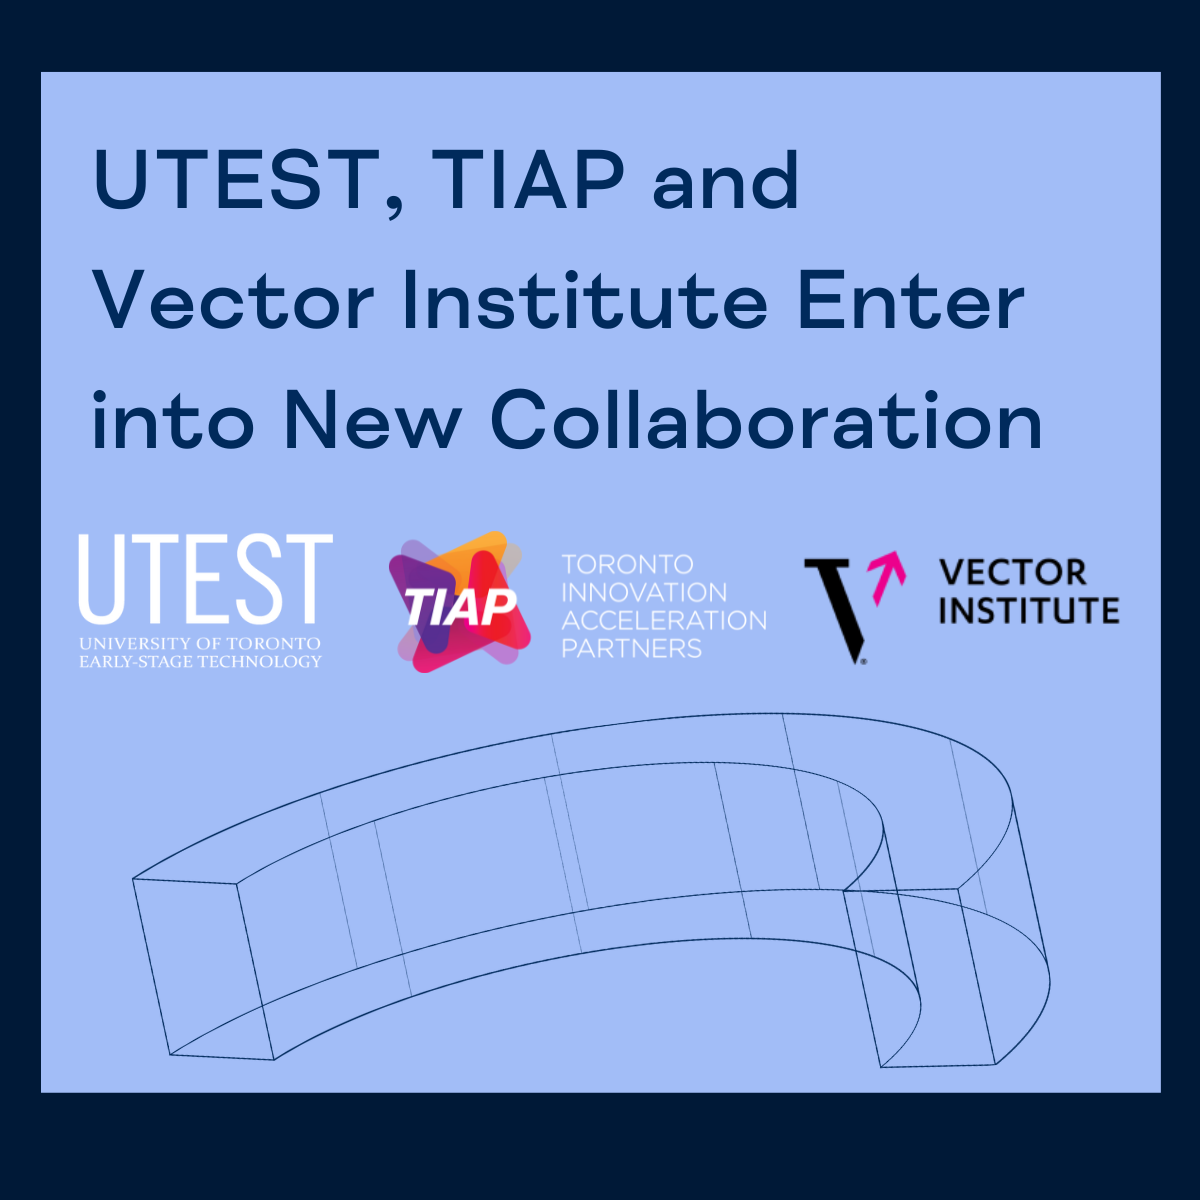 UTIAP, University of Toronto, and Vector Institute Enter into New Collaboration